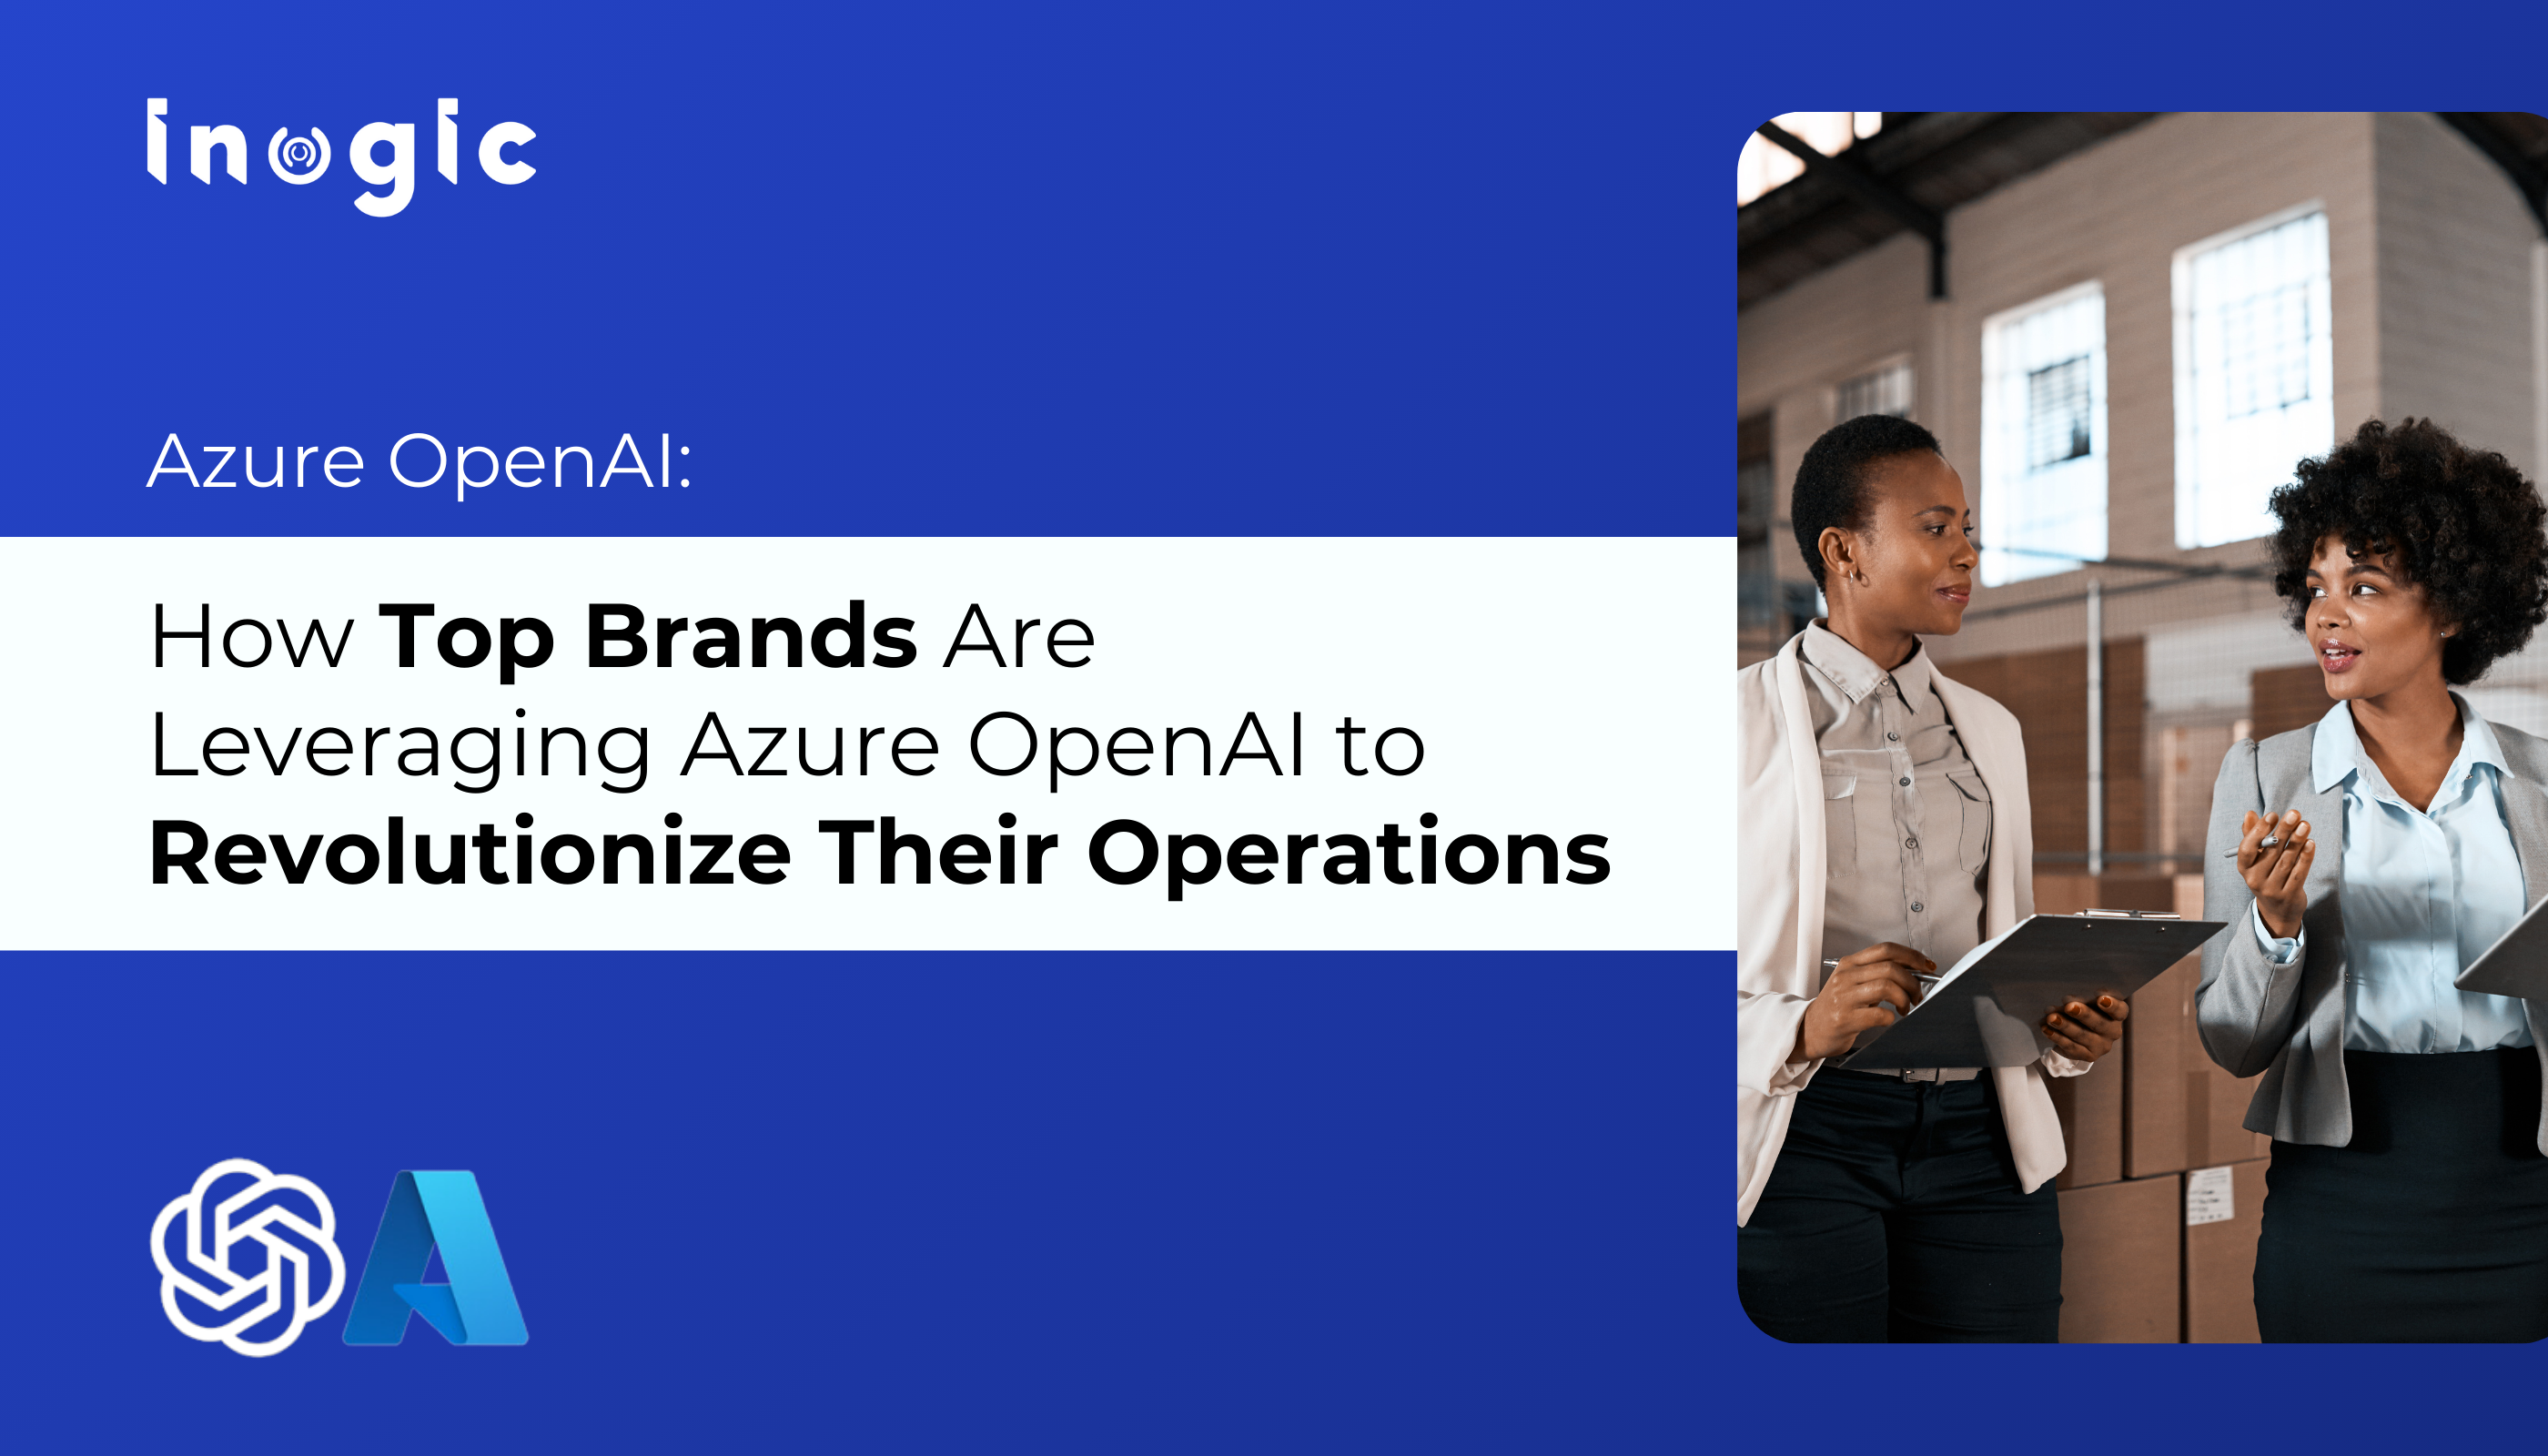 Azure OpenAI: How Top Brands Are Leveraging Azure OpenAI to Revolutionize Their Operations